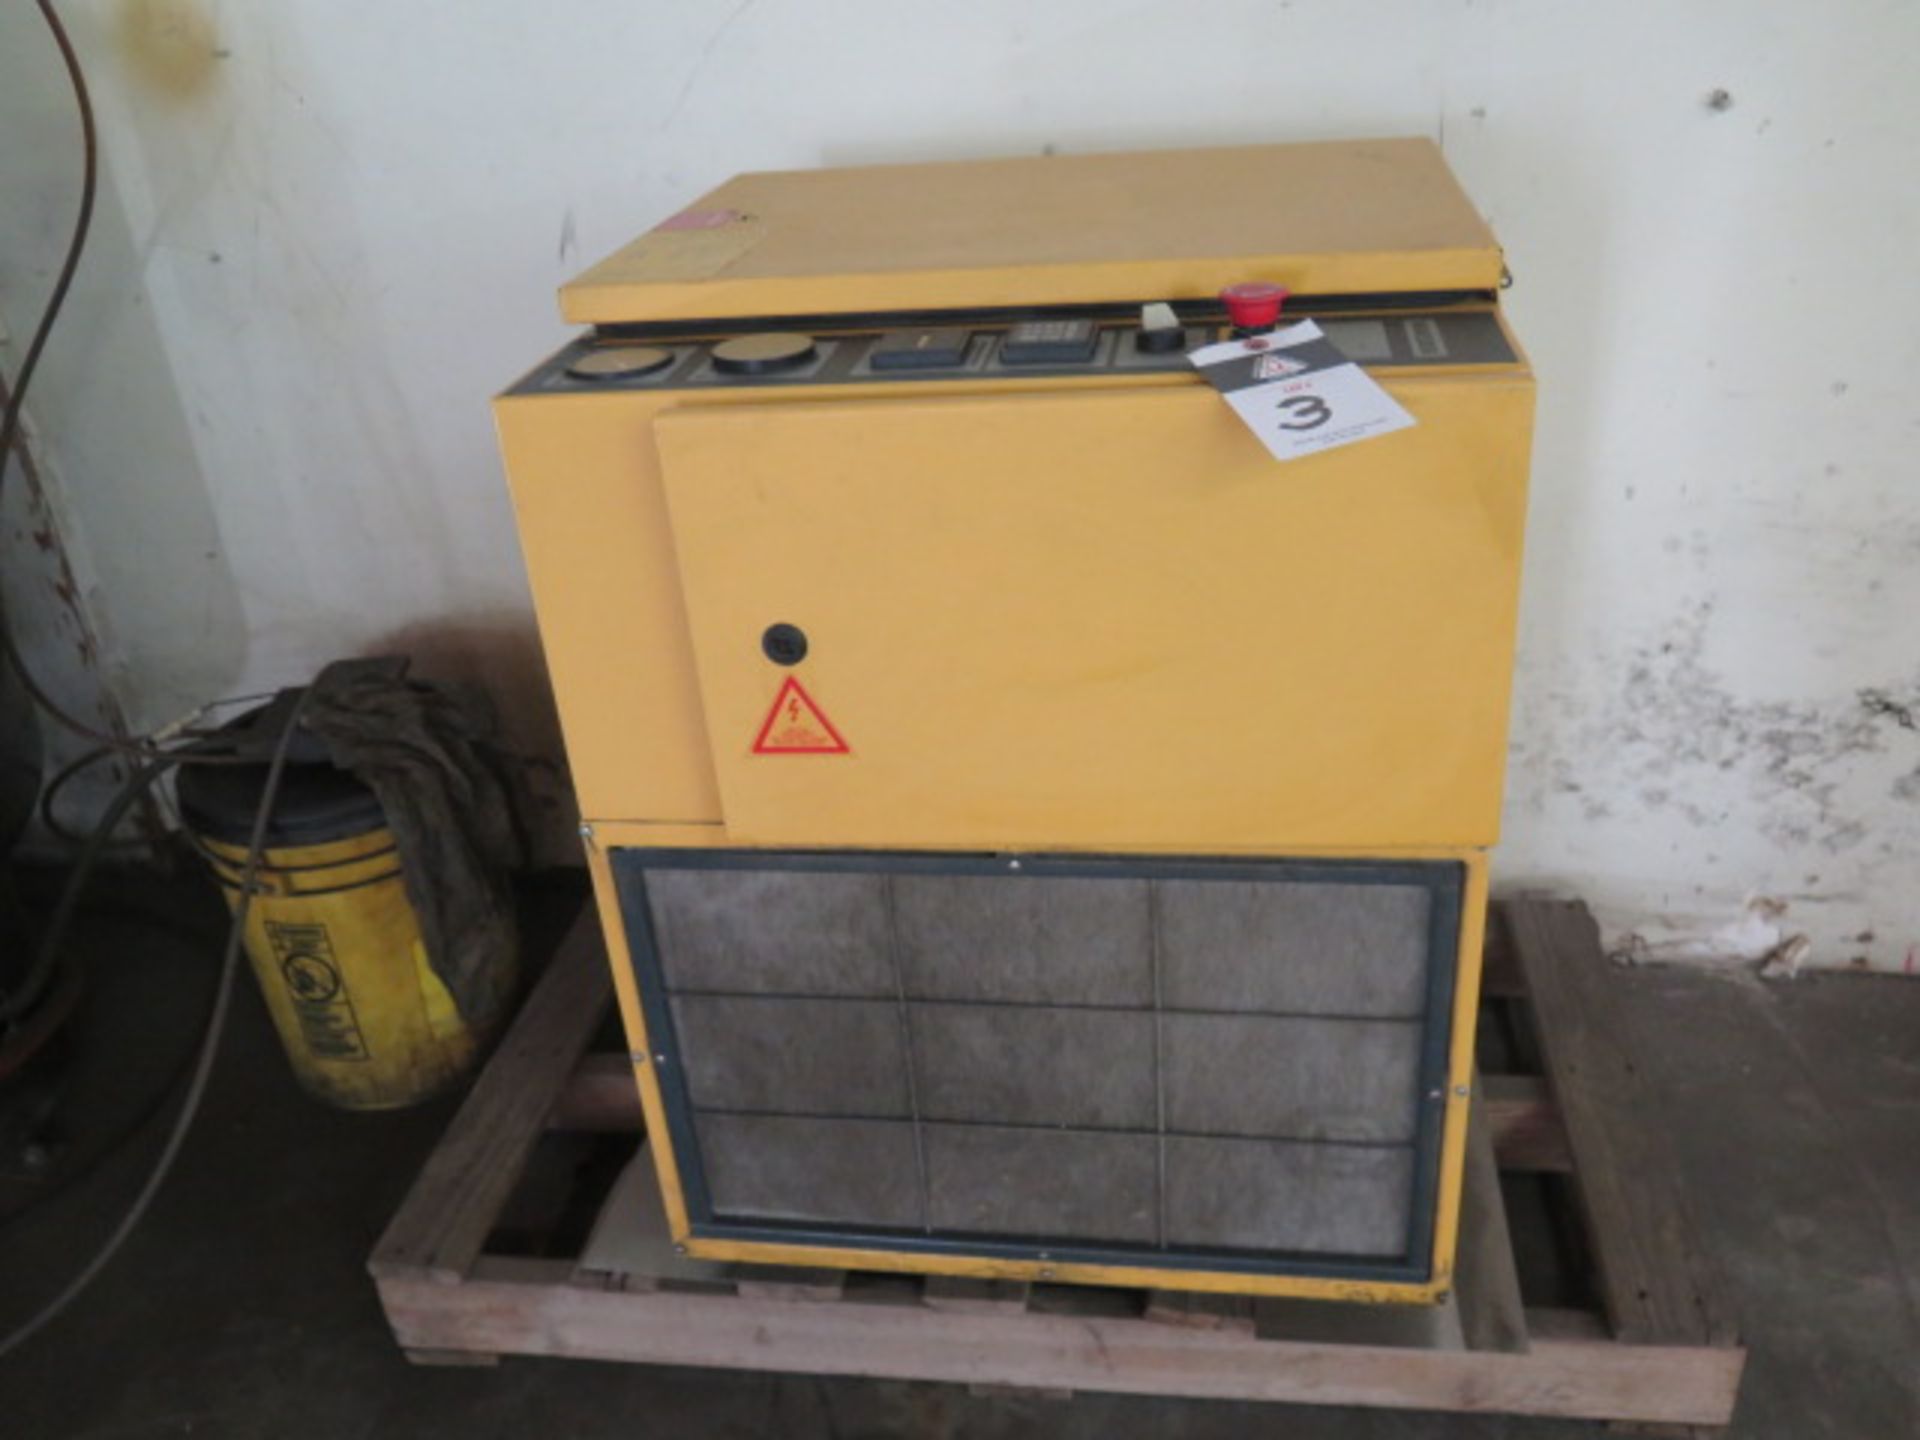 1996 Kaeser SM11 10Hp Rotary Air Compressor s/n 01114727 w/ 42 CFM @ 110 PSIG SOLD AS-IS